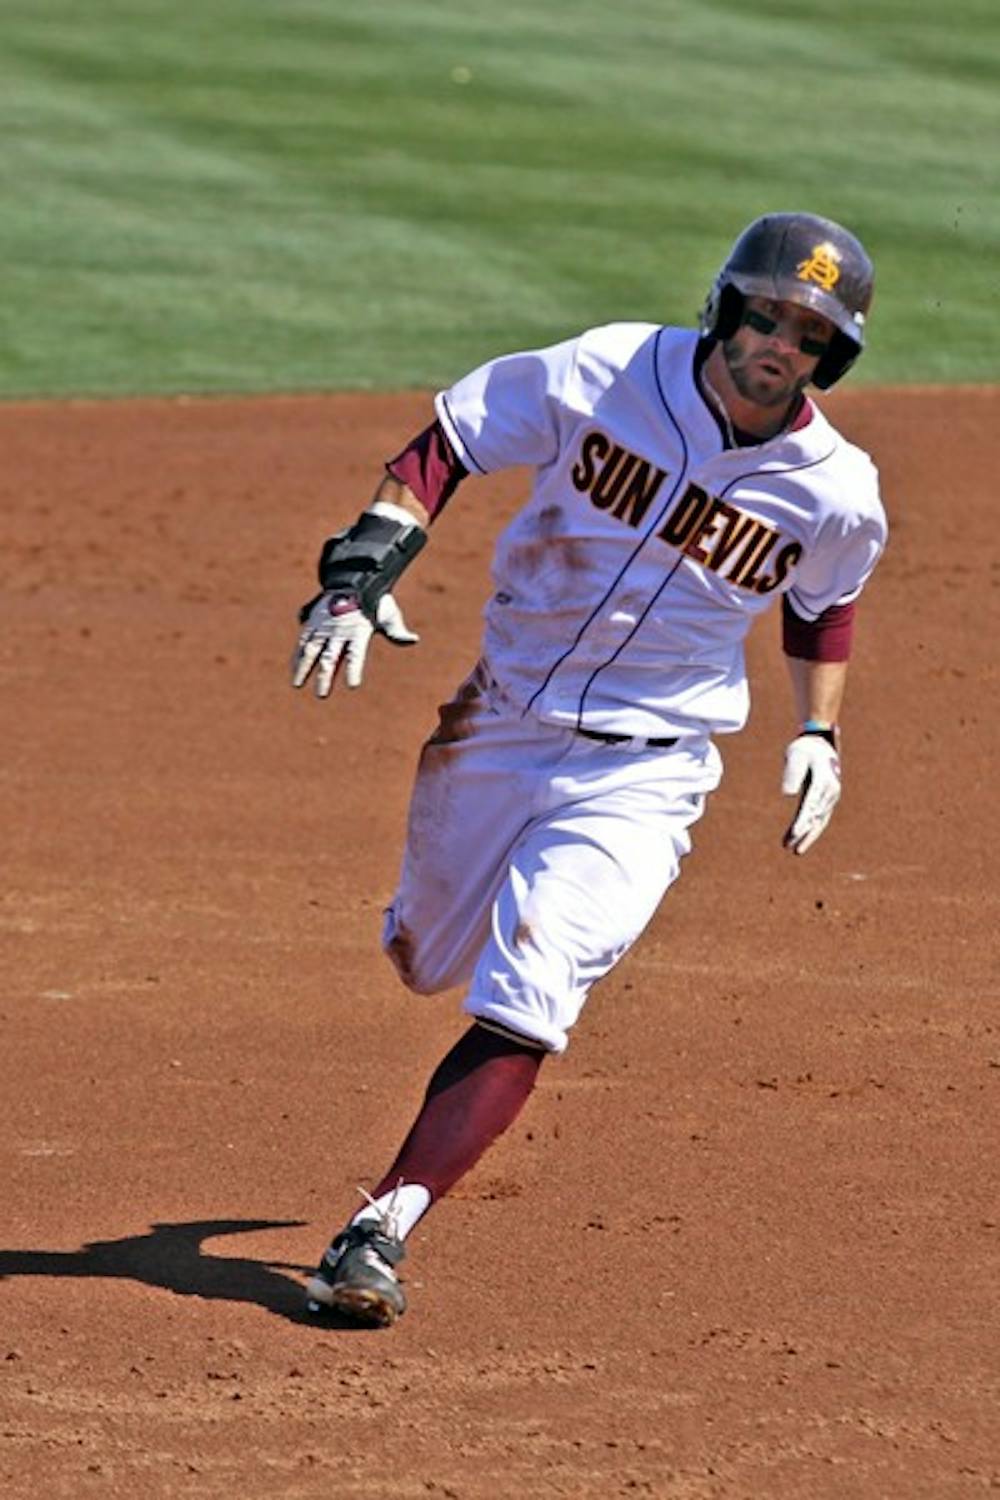 GOOD EYE: Senior outfielder Kole Calhoun takes a pitch during a game last month at Packard Stadium. ASU opens up a weekend series against Auburn on Friday. (Photo by Scott Stuk)